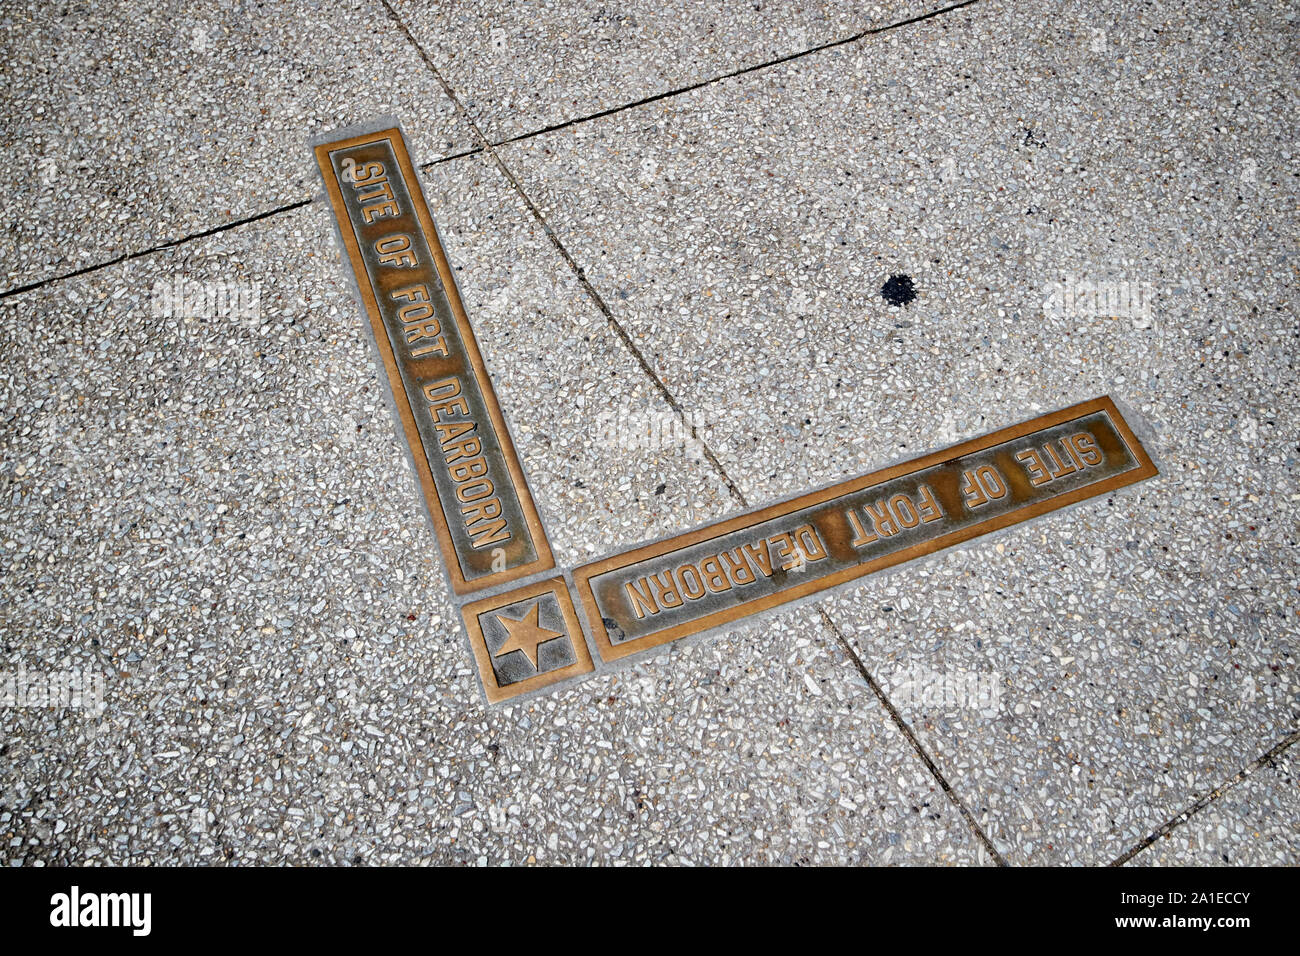 site of fort dearborn marker on sidewalk in downtown chicago illinois united states of america Stock Photo